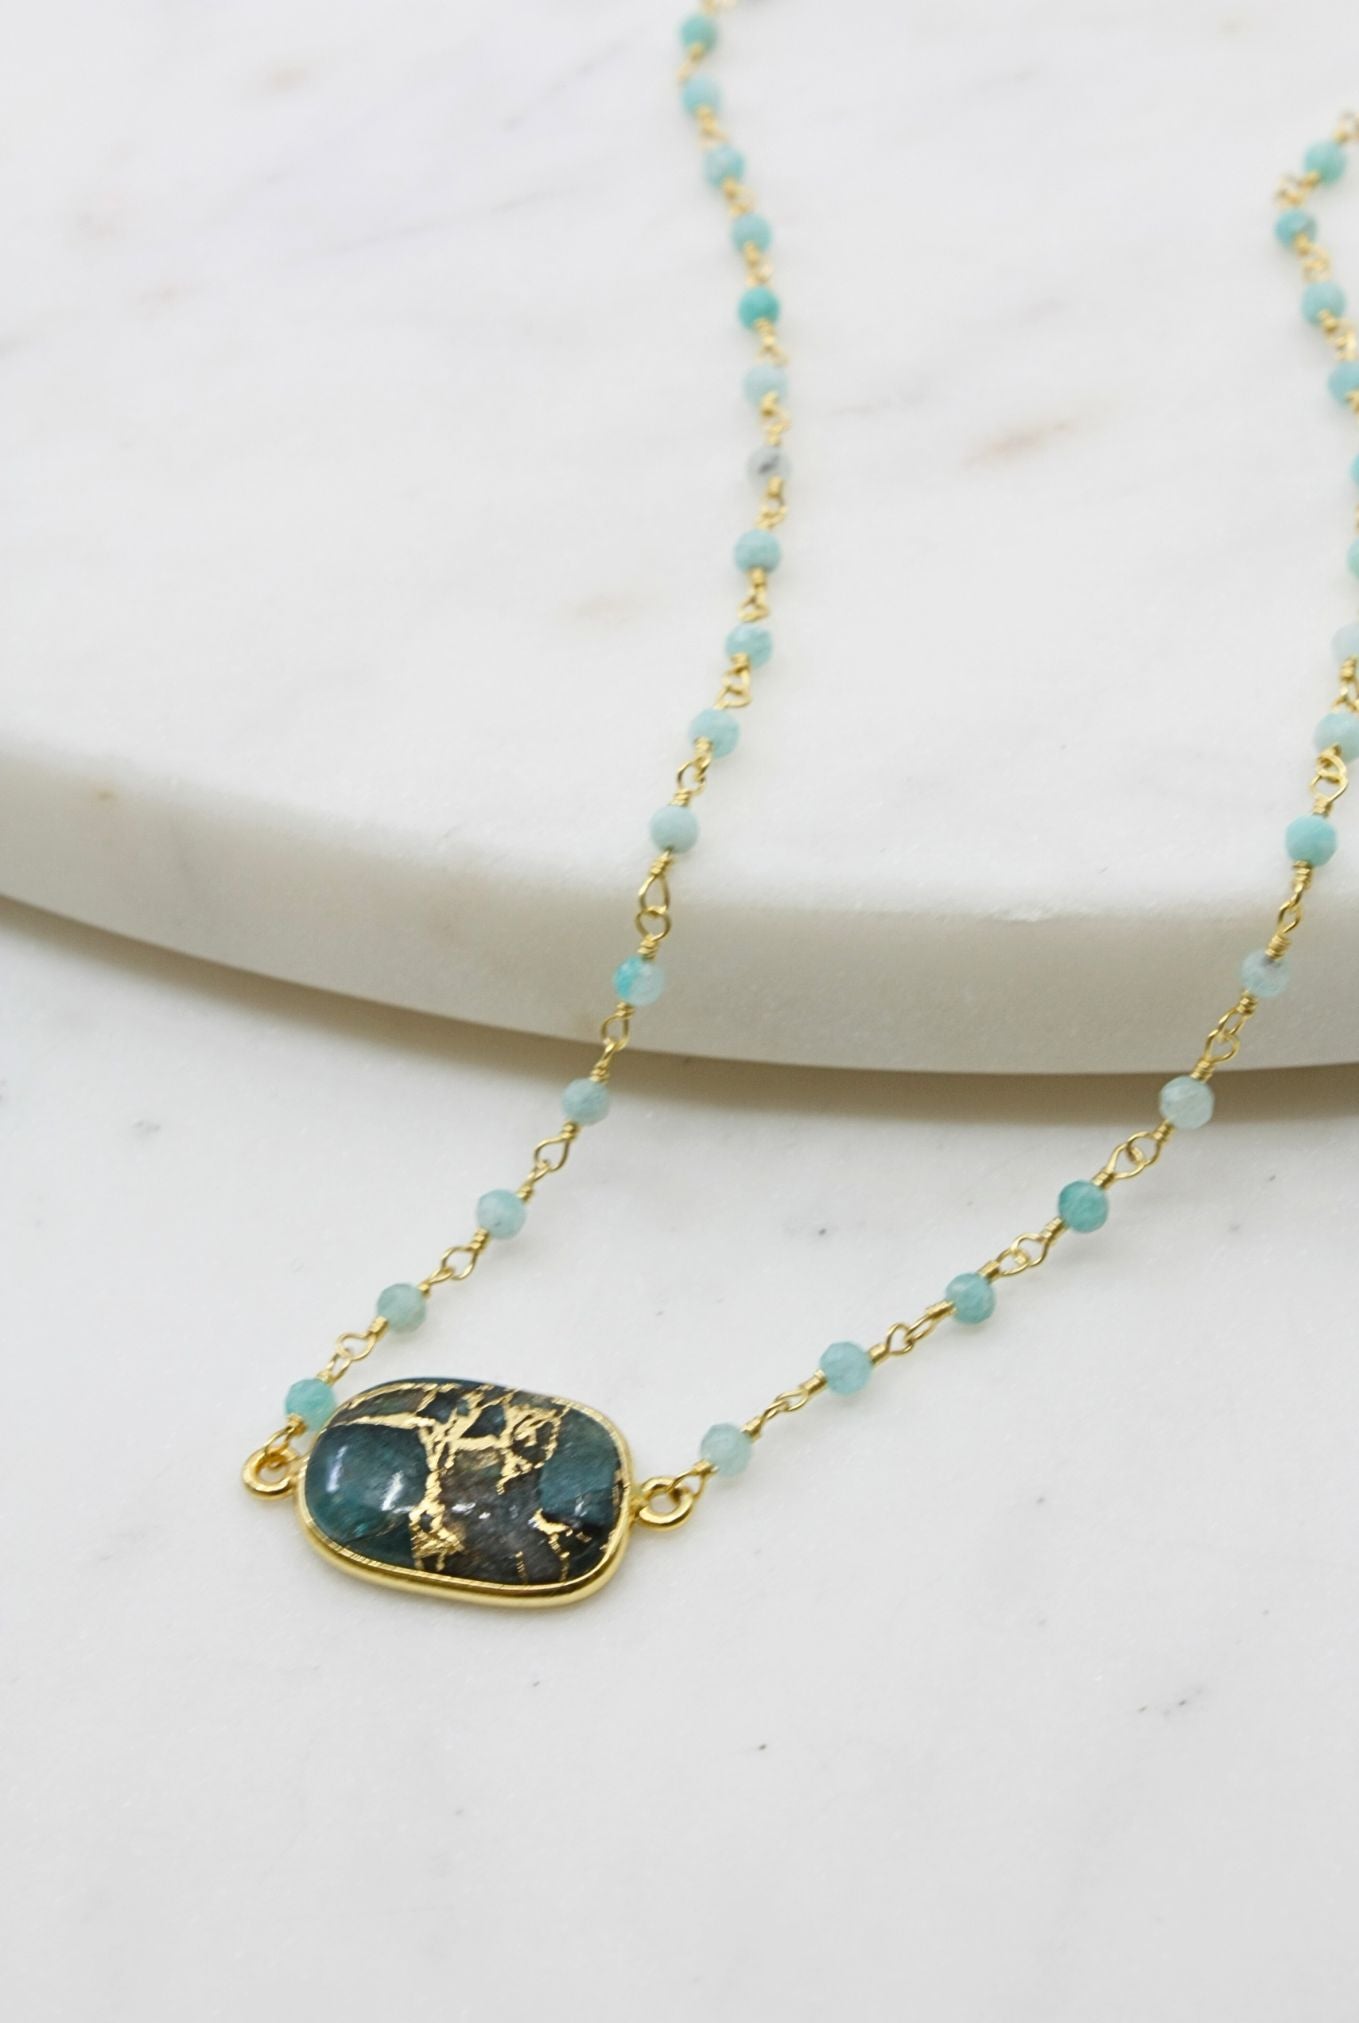 Mrs. Parker Endless Summer Necklace in Teal Turquoise Mojave